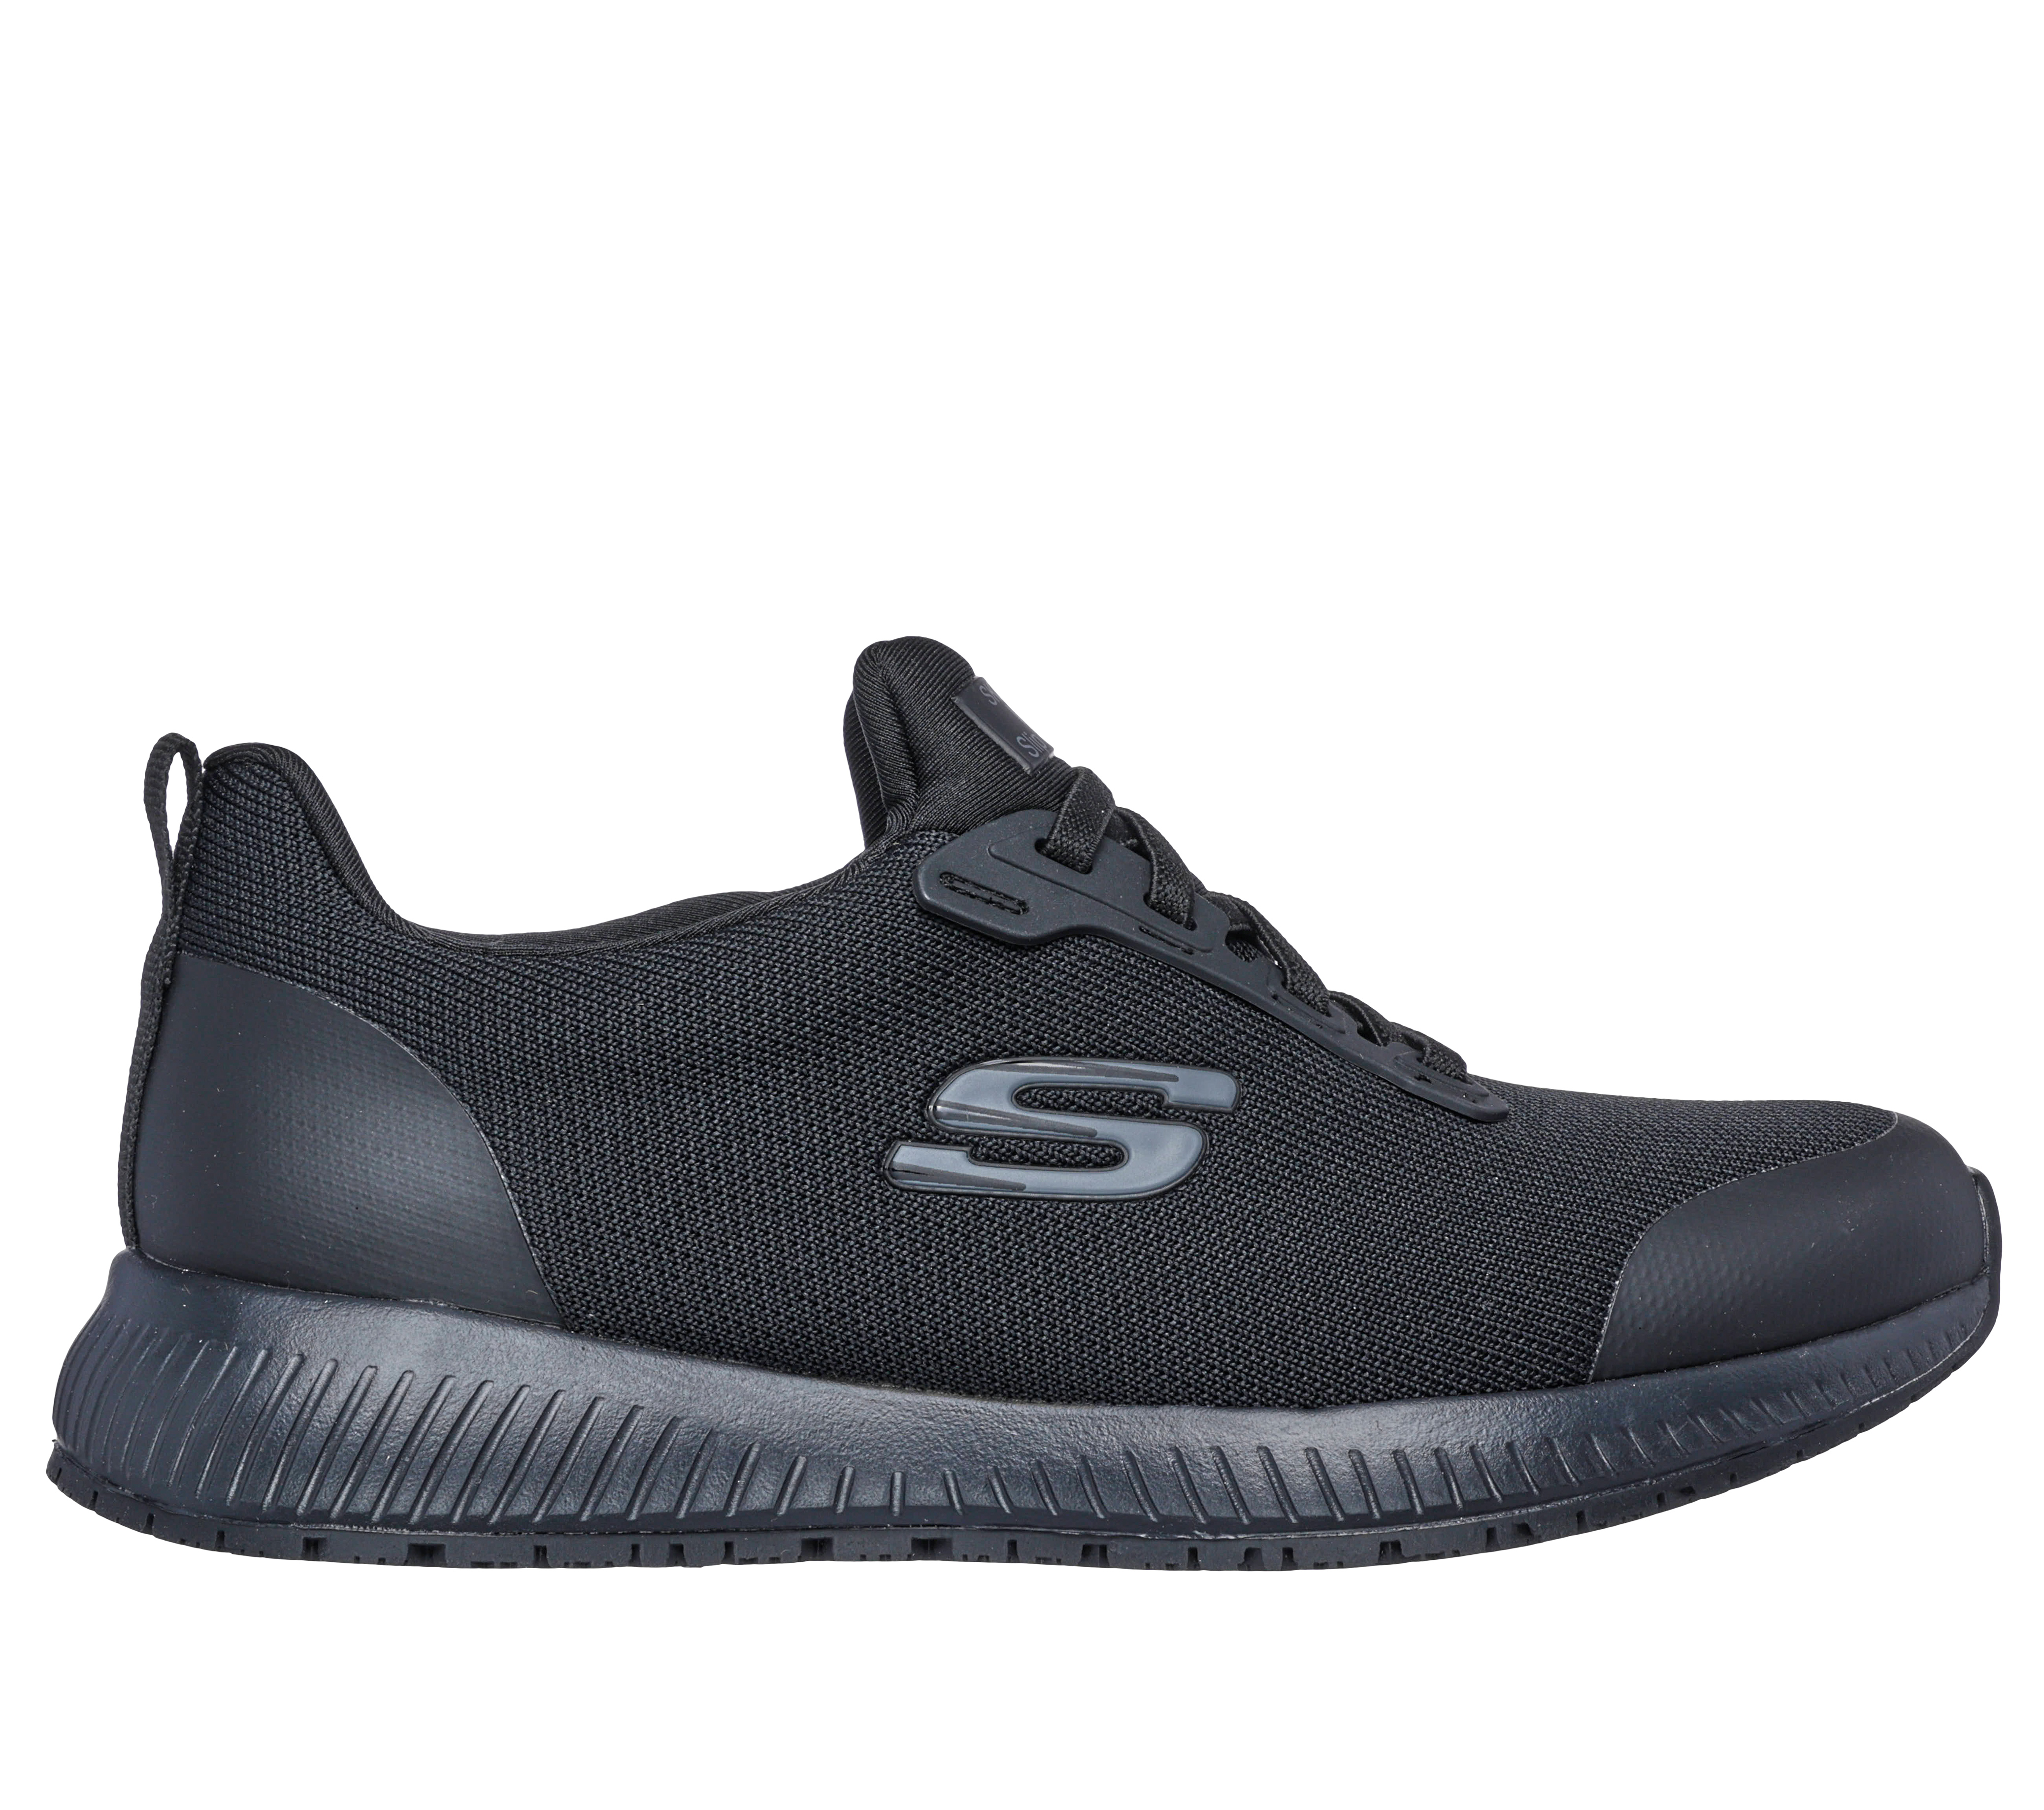 are skechers good shoes for work